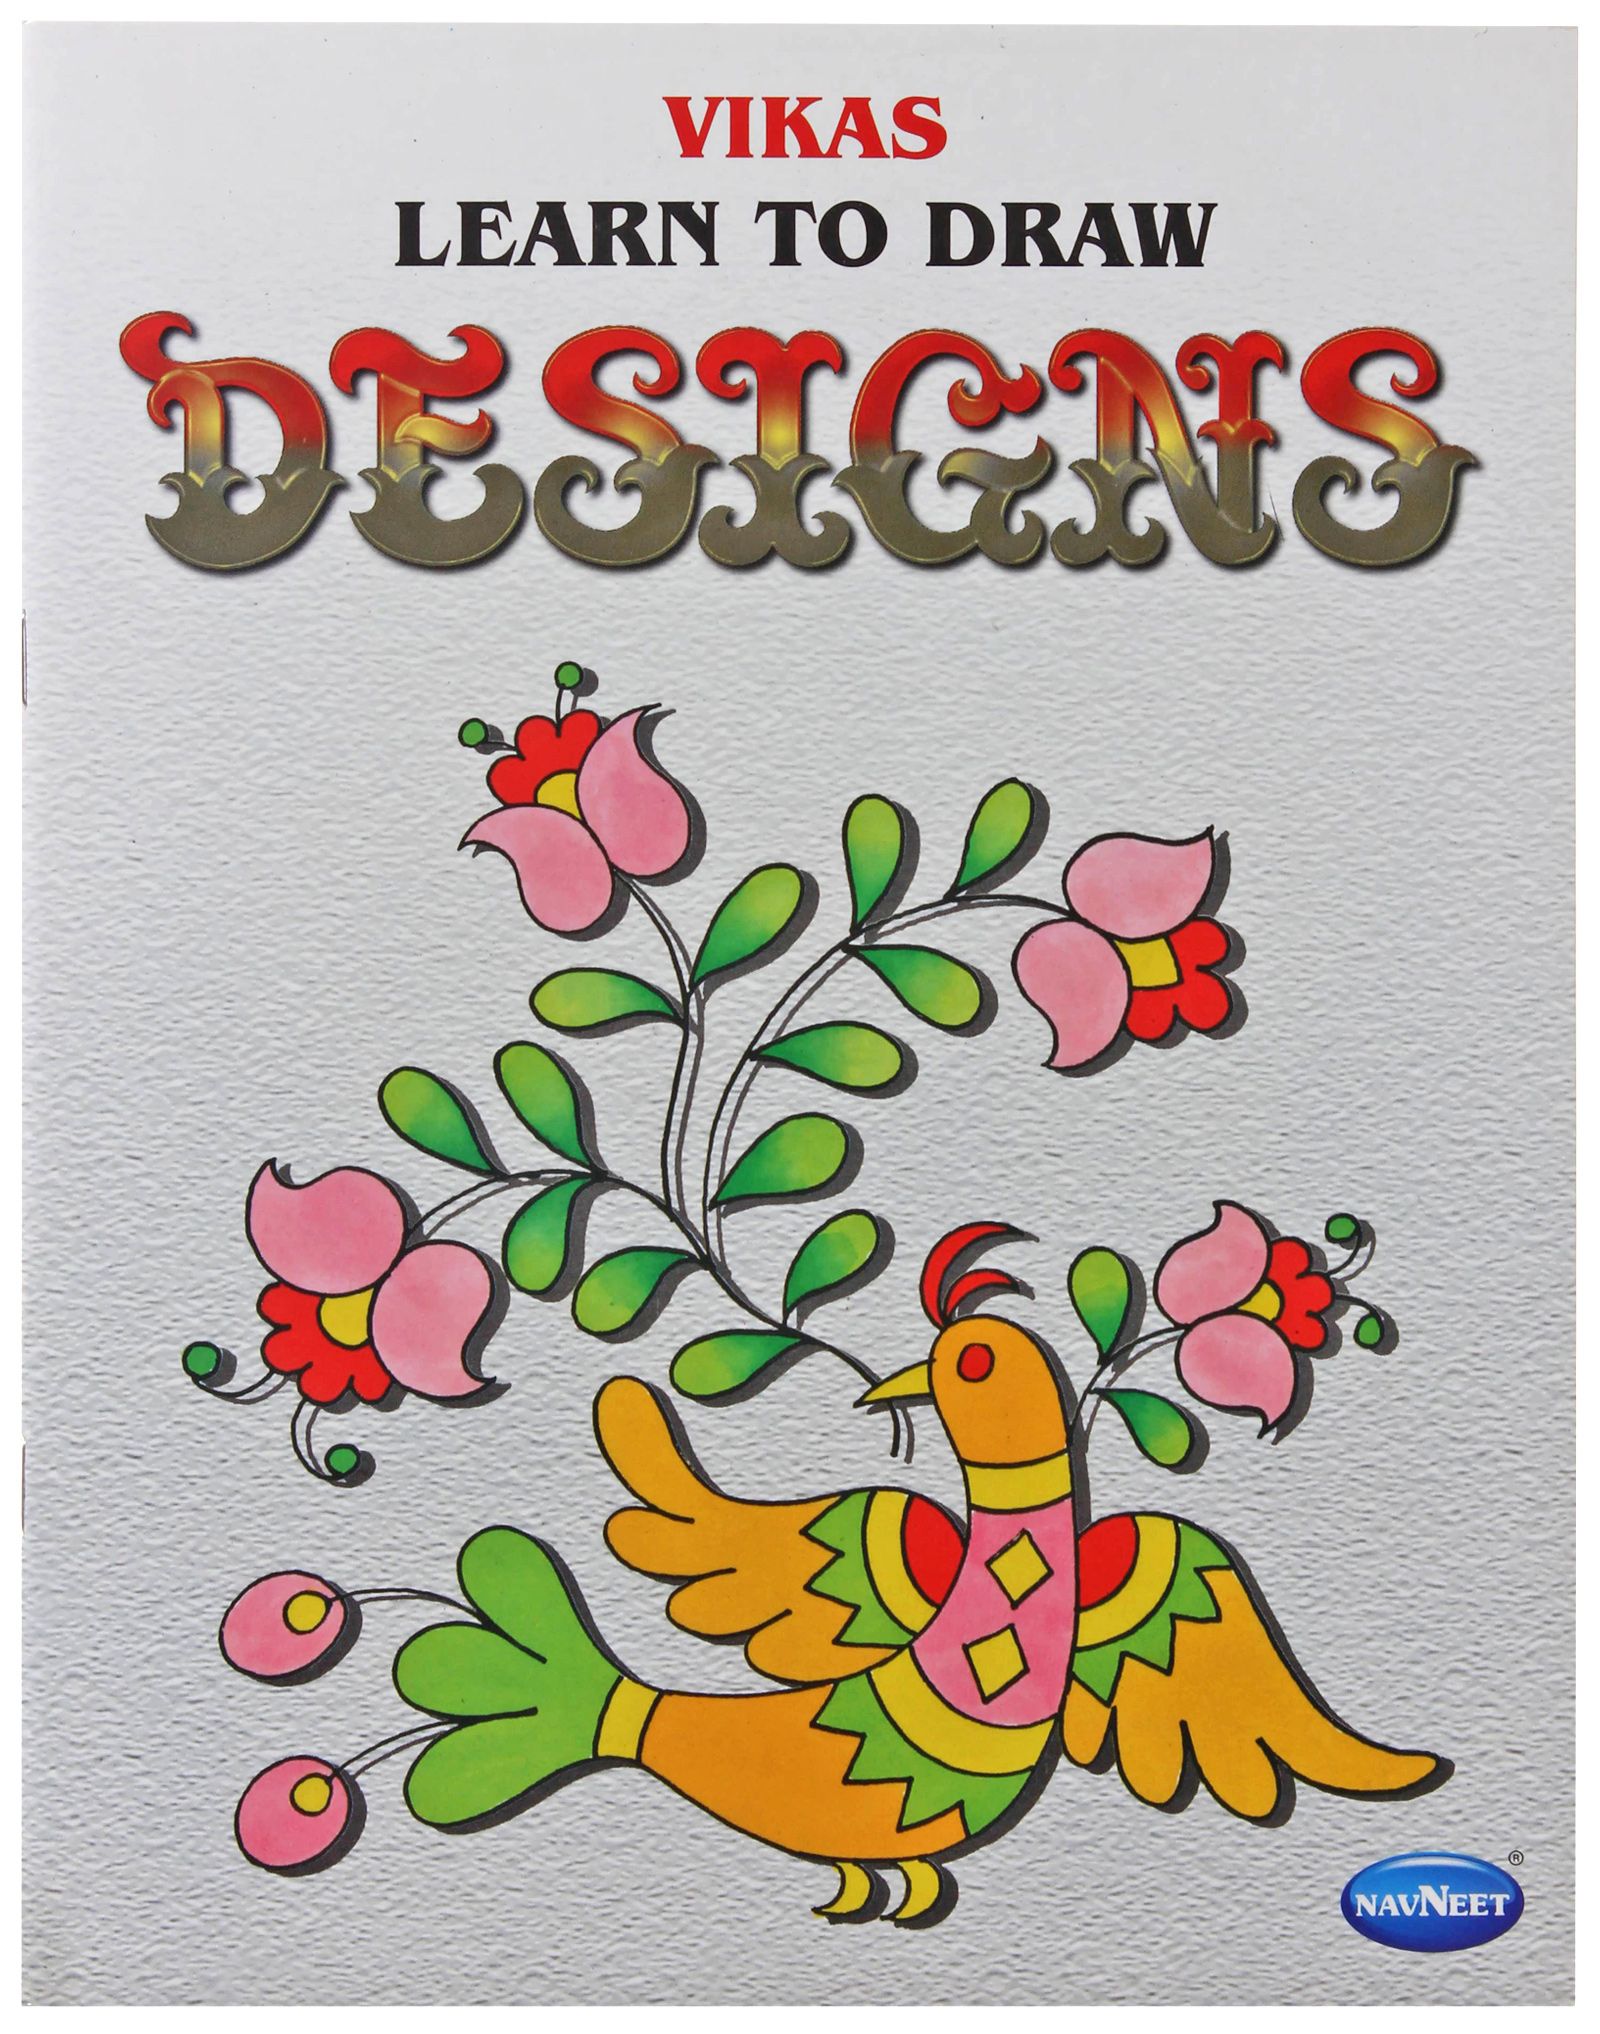 NavNeet - Learn To Draw Designs